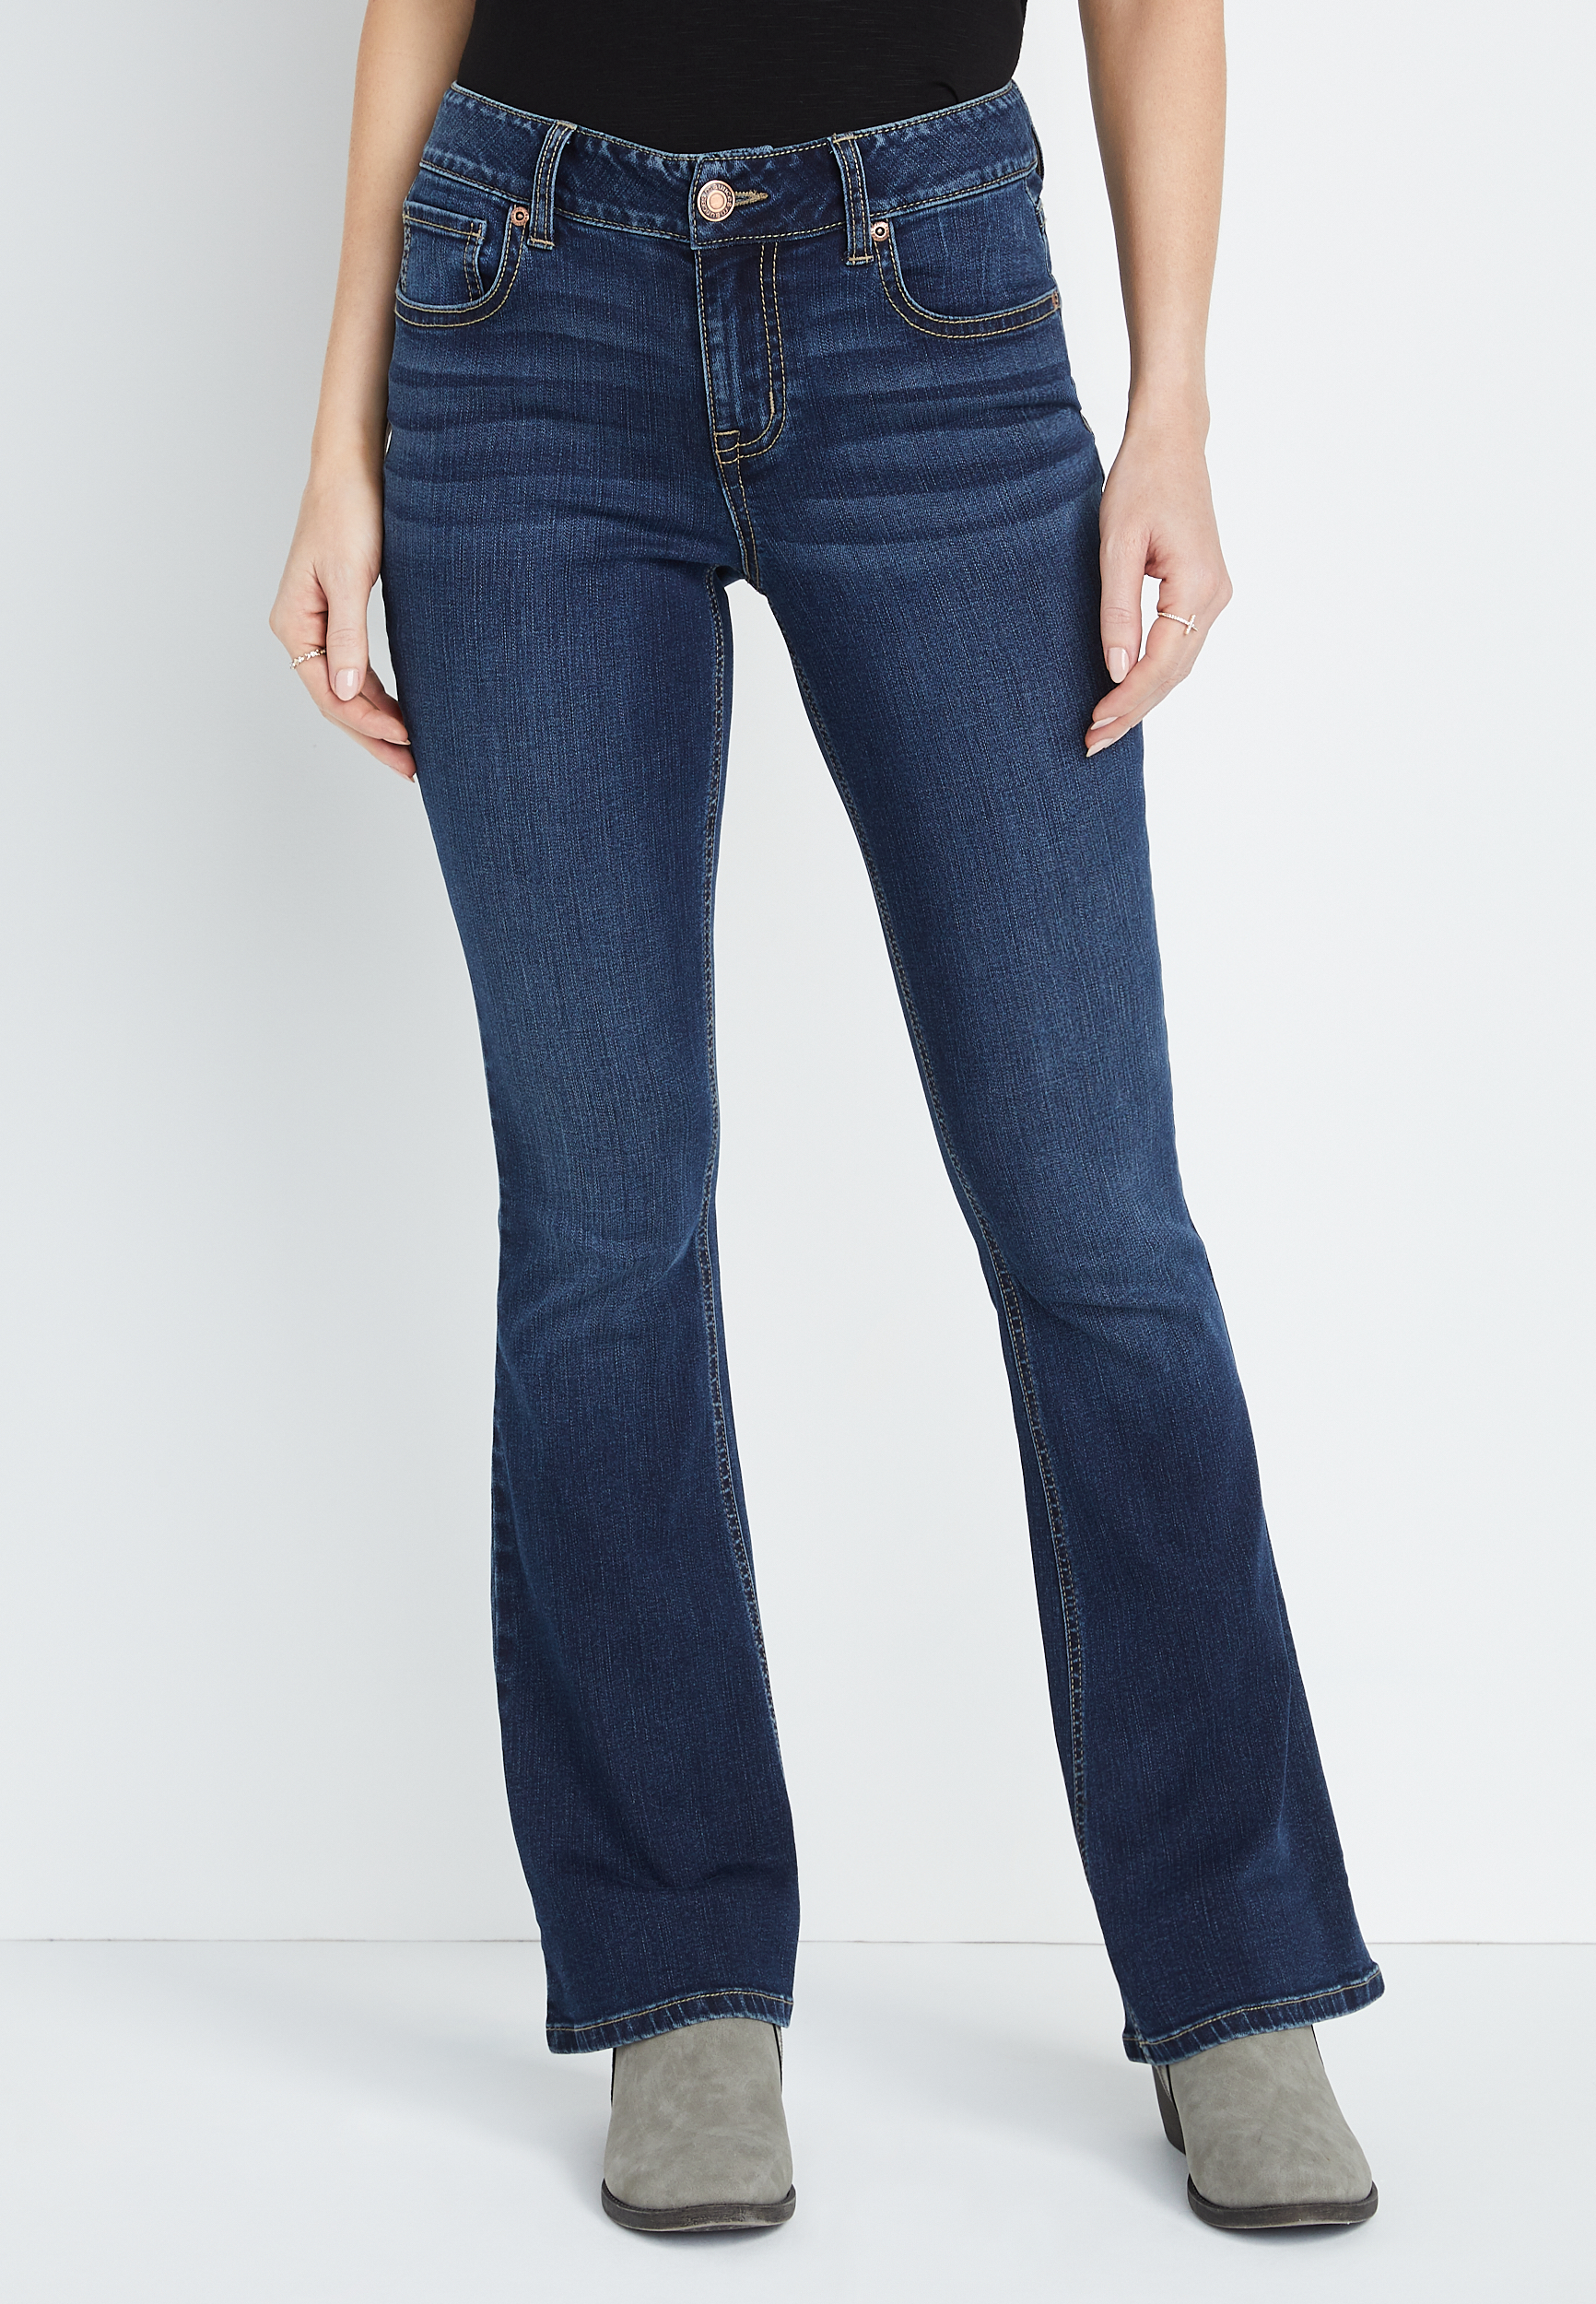 m jeans by maurices™ Classic Flare Mid Rise Jean | maurices